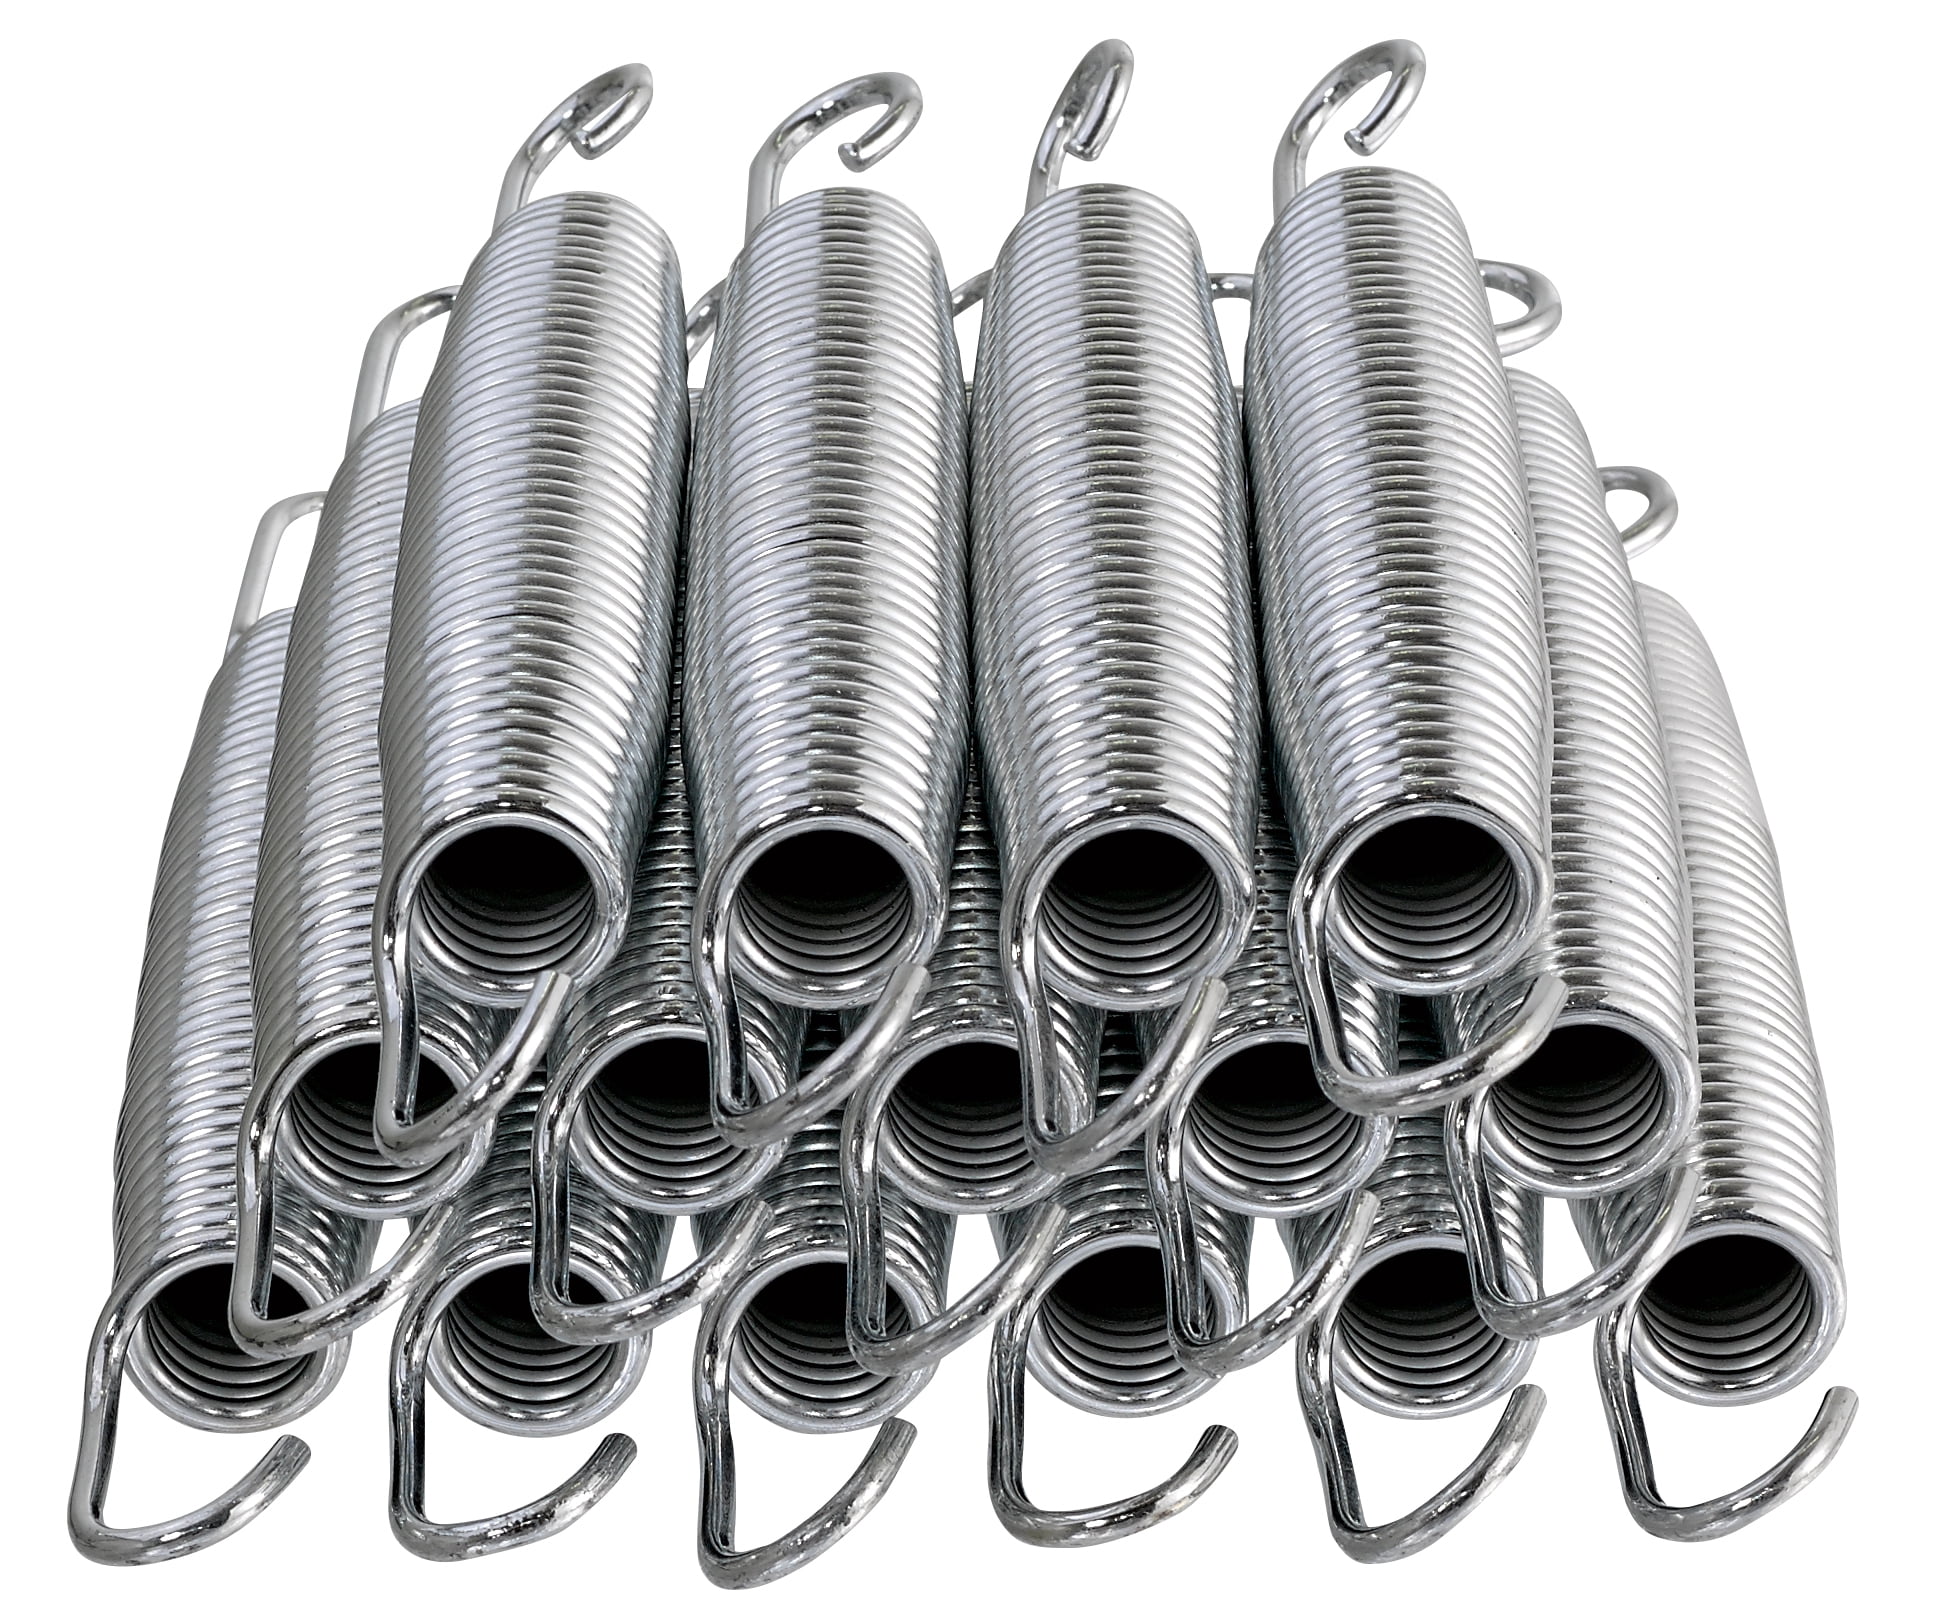 60pcs 5.5" Inch Trampoline Springs Heavy-Duty Galvanized Steel Replacement Set